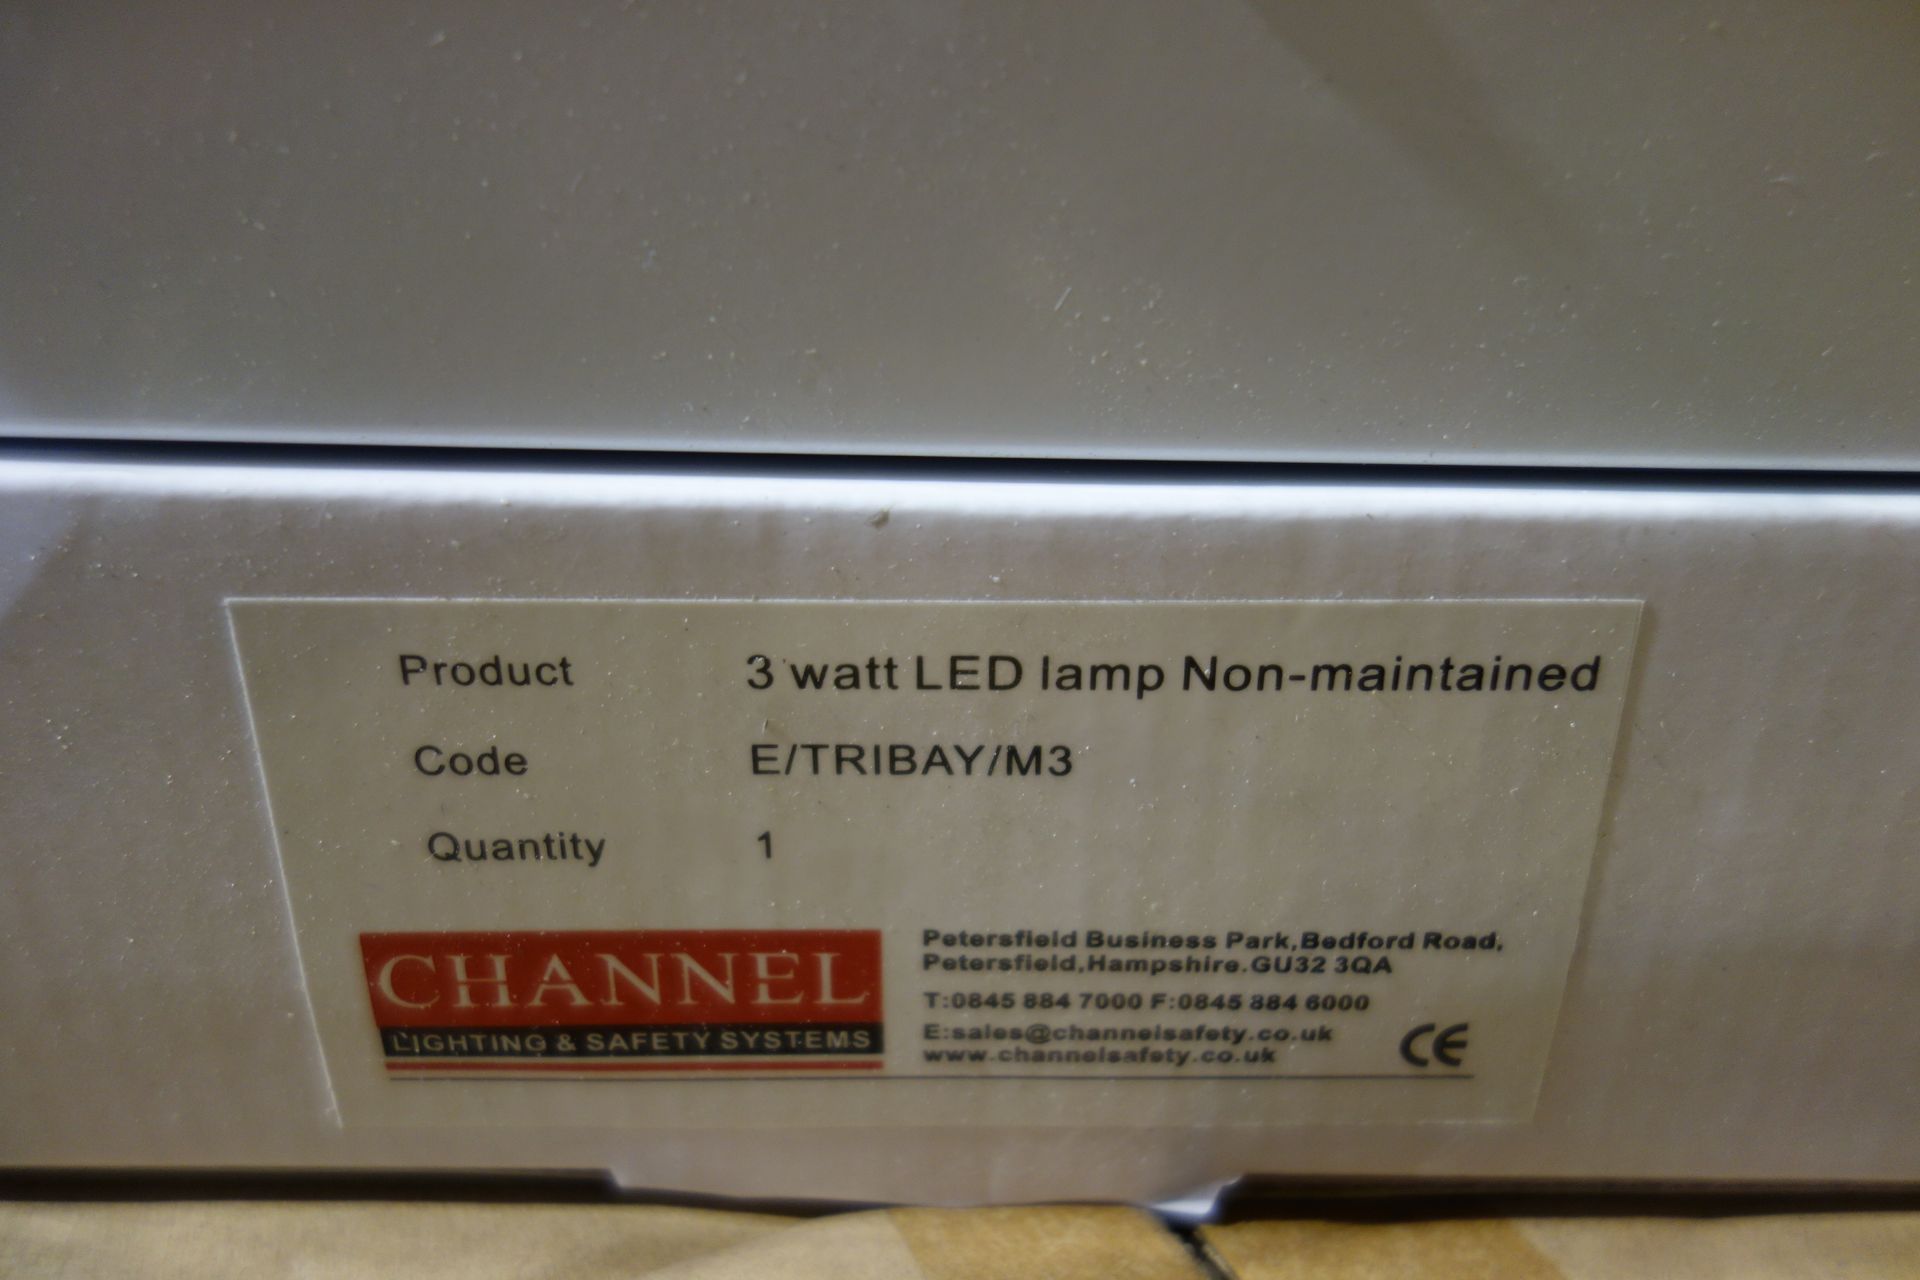 4 X Channel E/TRIBAY/M3 3W LED Non-Maintained Emergency Fitting